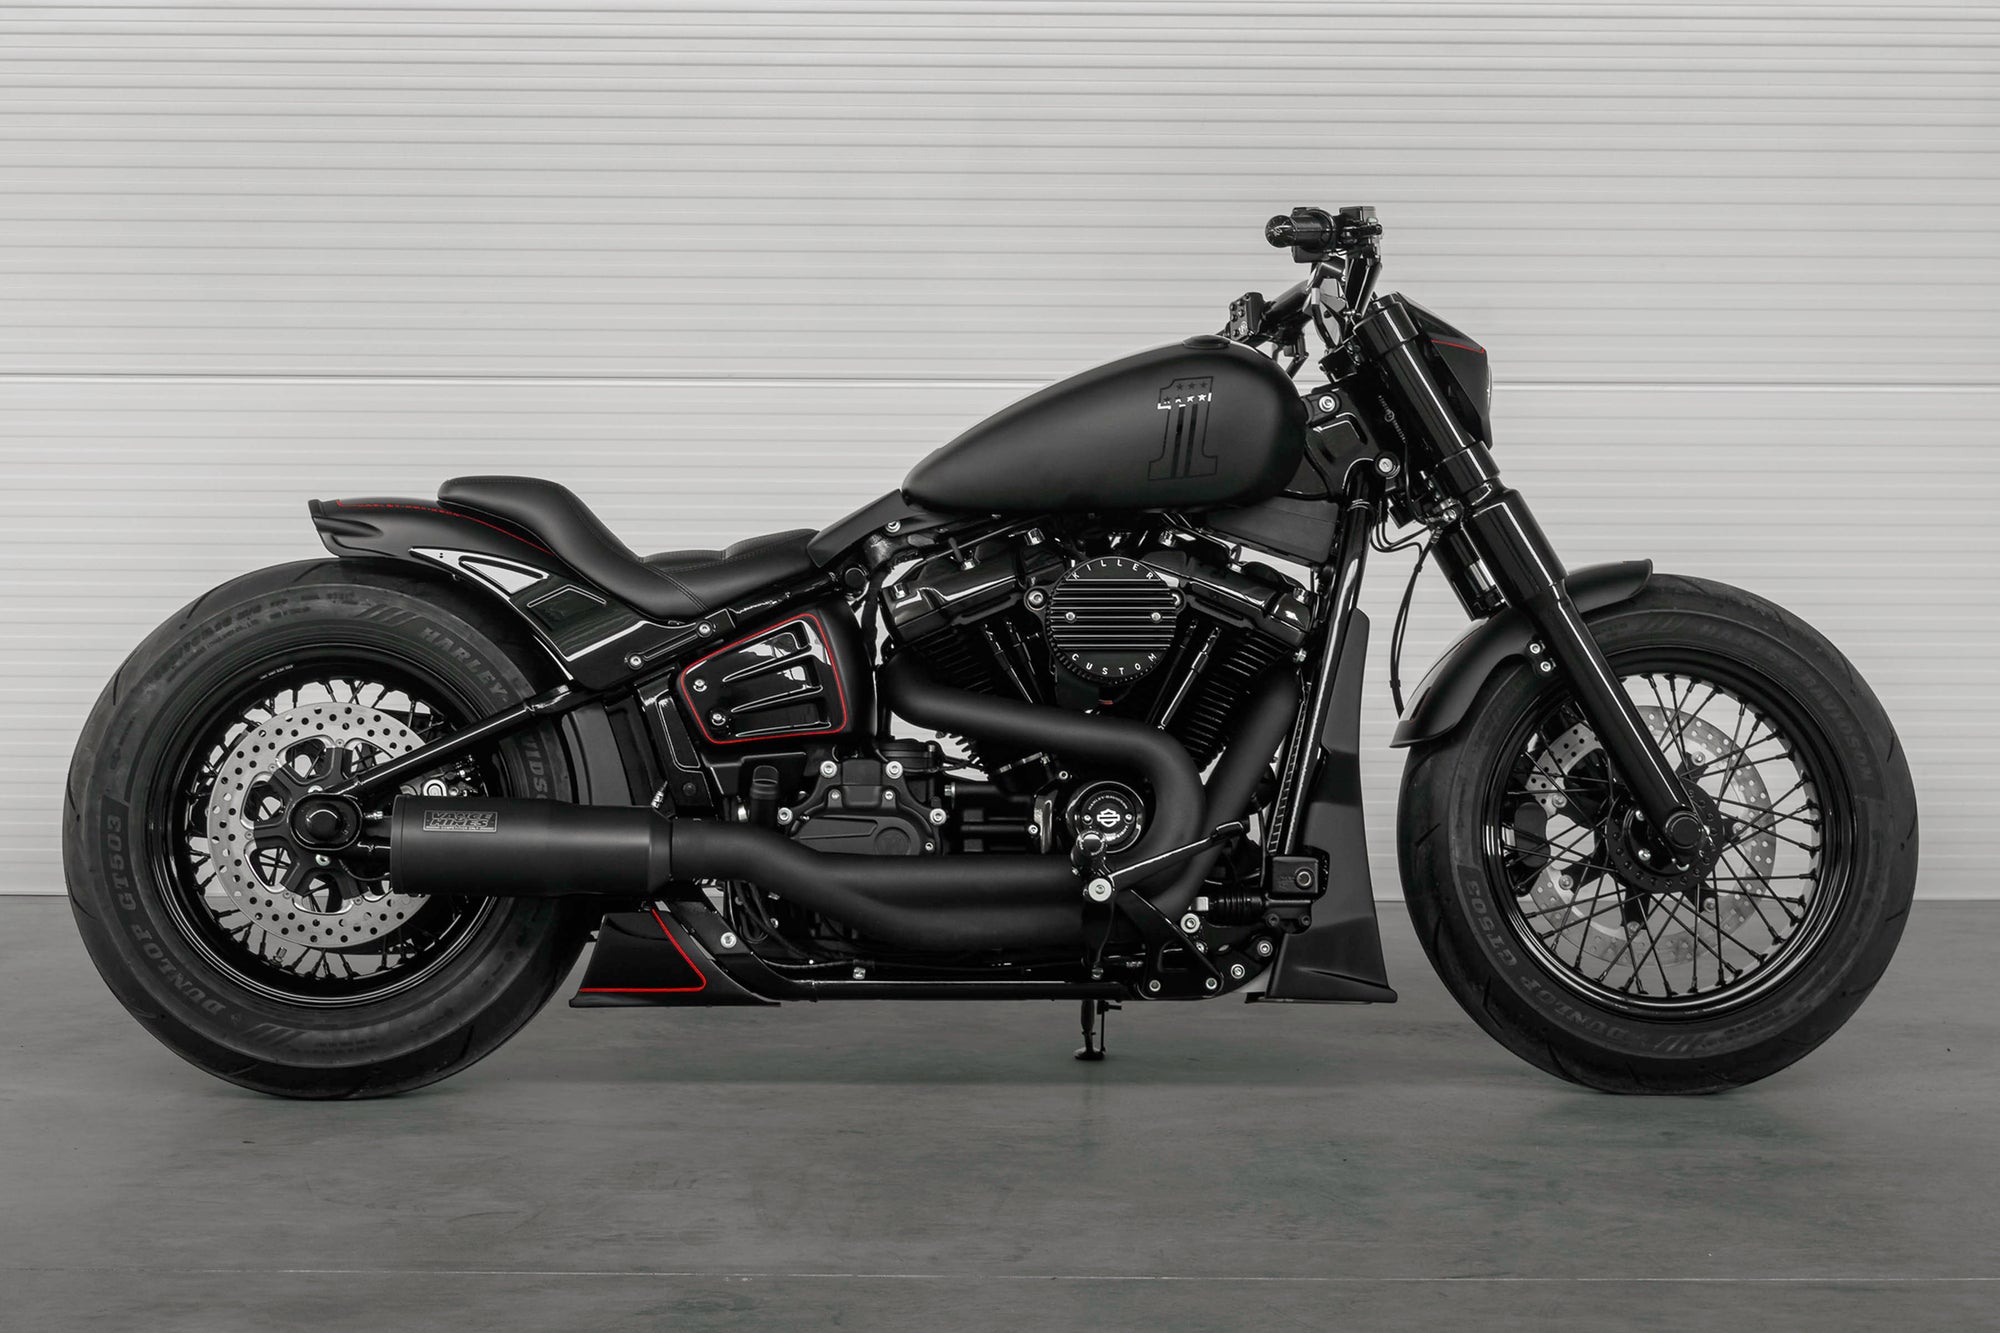 Modified Harley Davidson Softail Standard motorcycle with Killer Custom parts from the side in a modern white garage